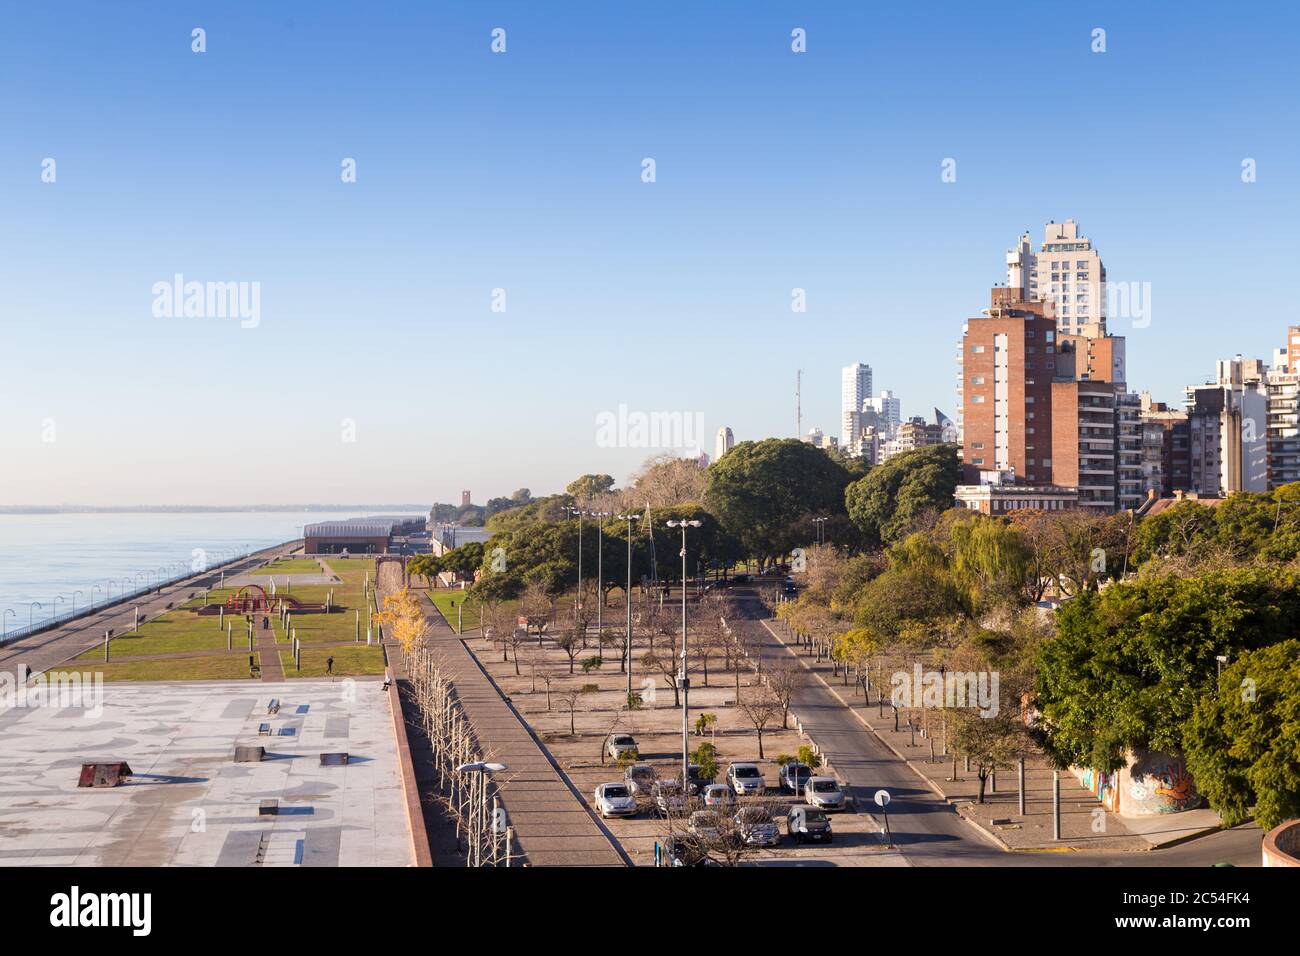 ROSARIO, ARGENTINA - JULY 6, 2019: Panoramic view of the city. Riverside park next to the Parana River. Classic promenade in the Spain Park. Stock Photo